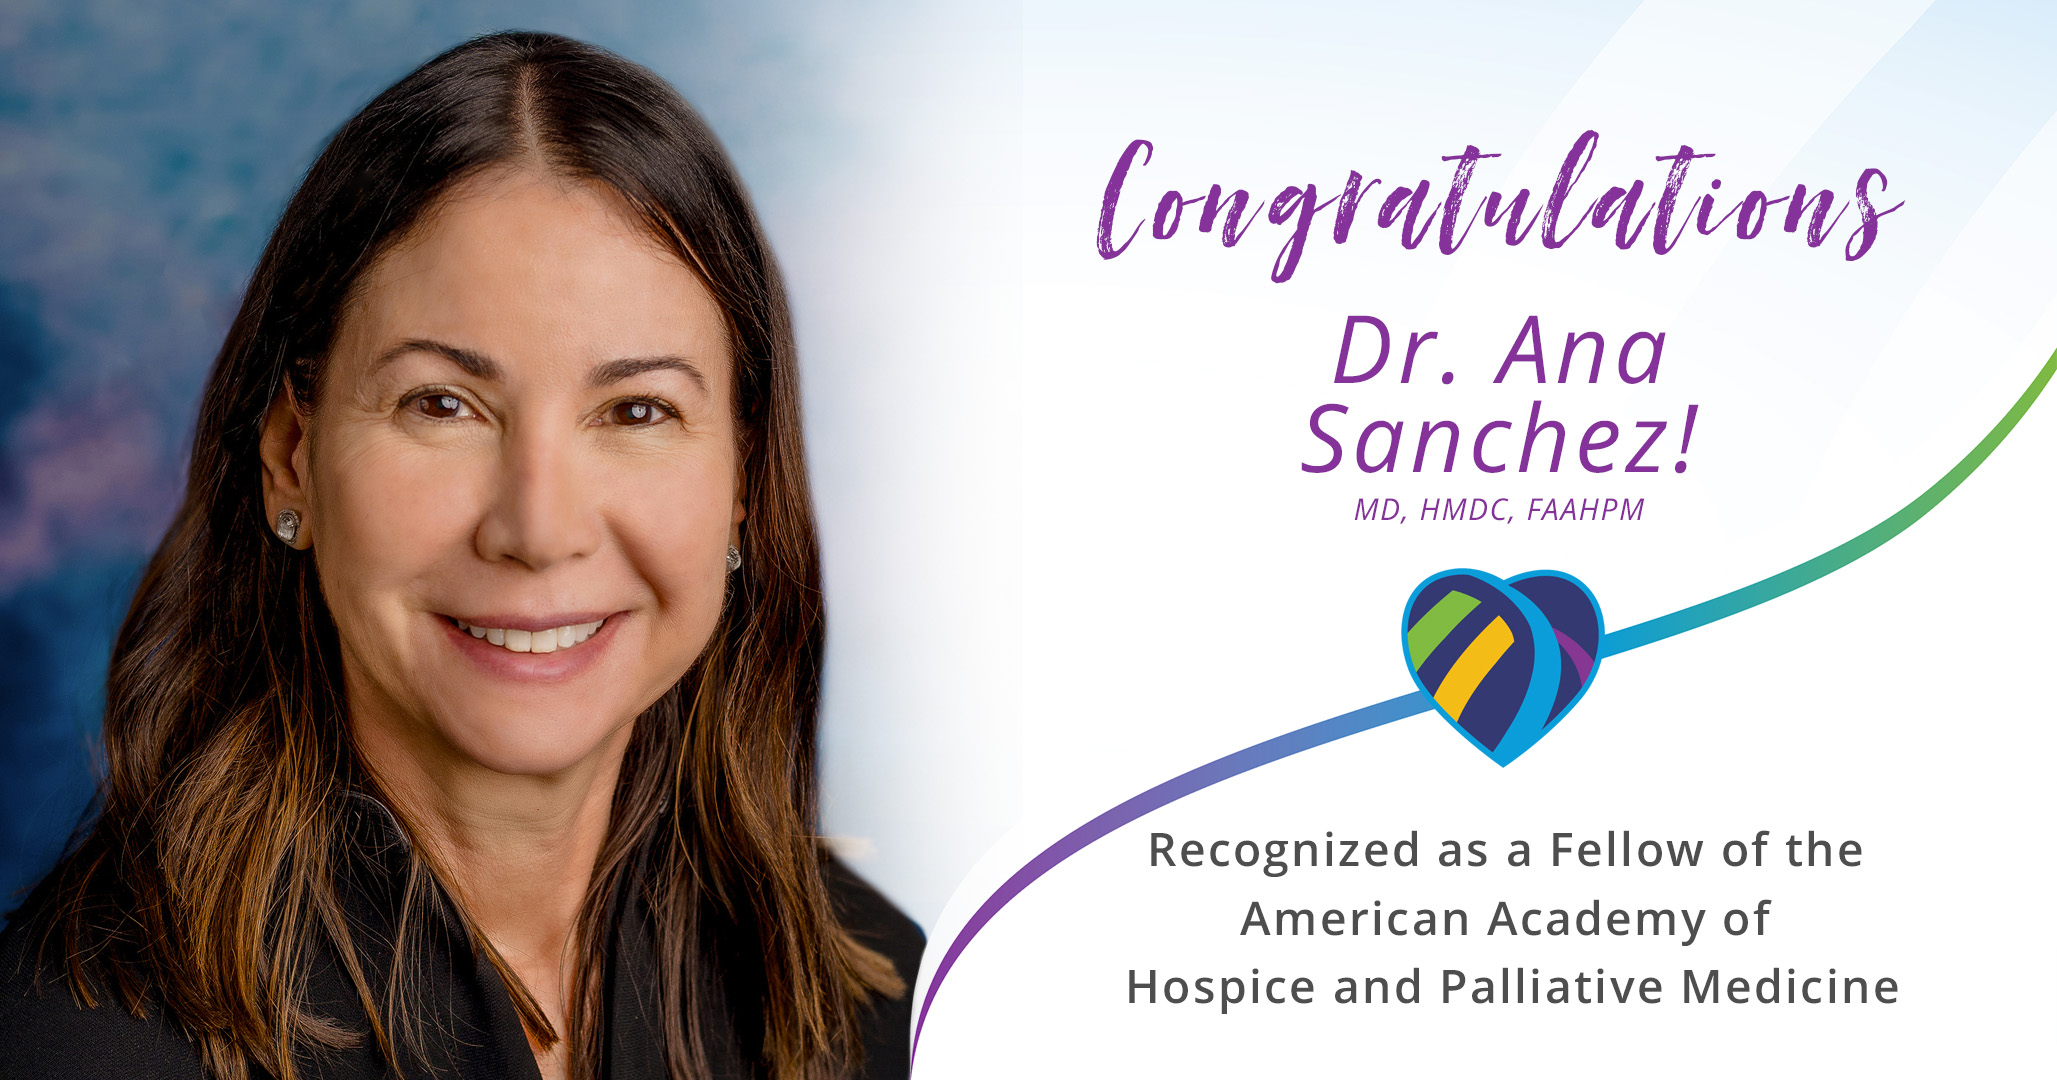 Dr. Ana Sanchez Fellow of the American Academy of Hospice and Palliative Medicine